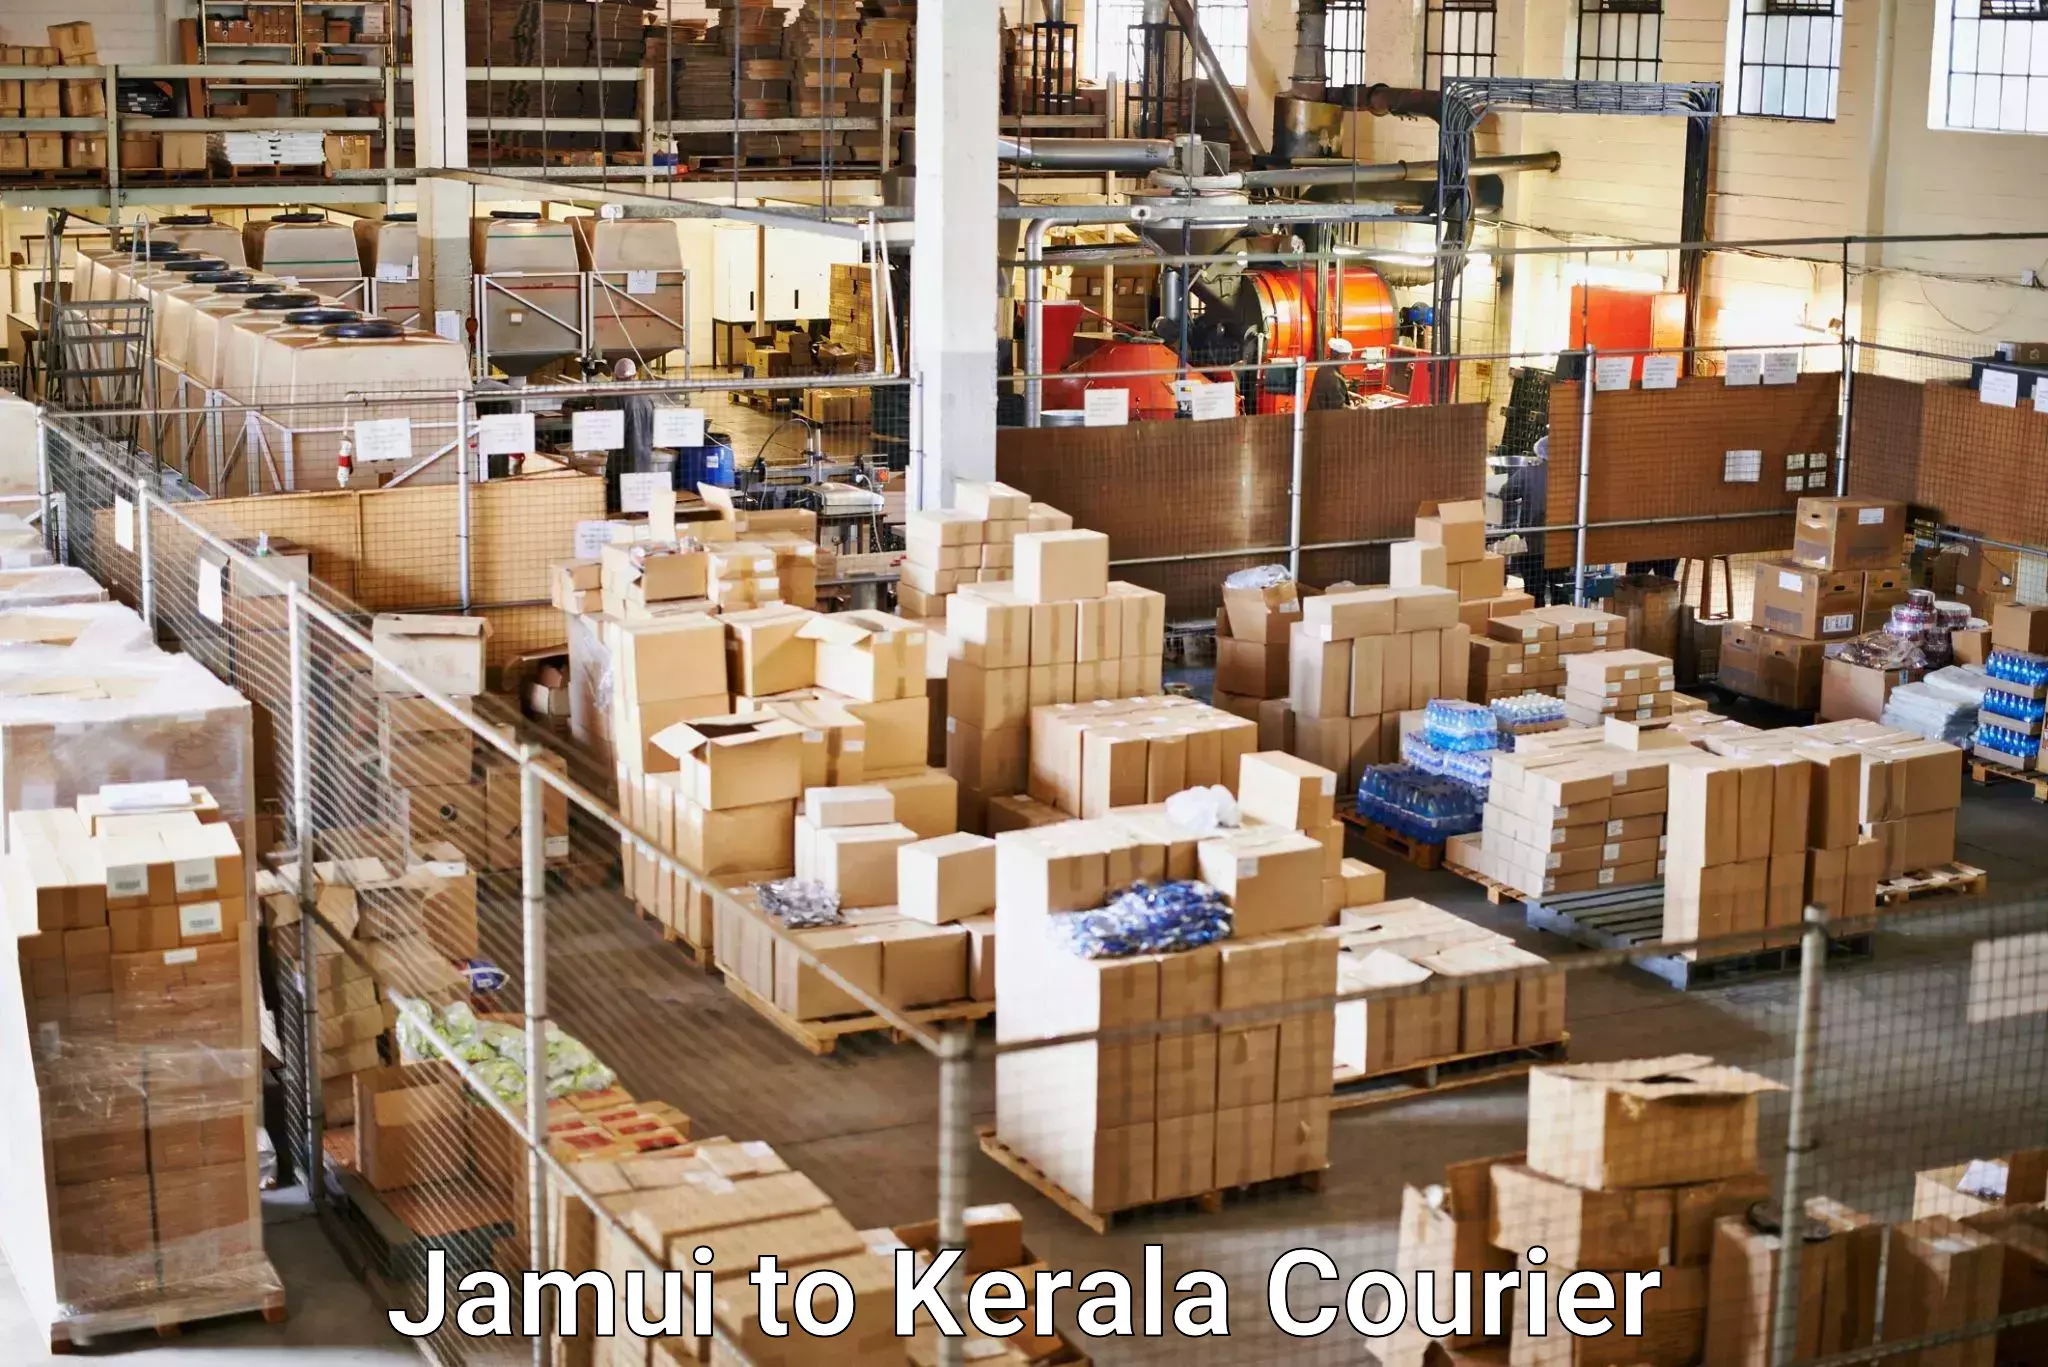 Parcel service for businesses Jamui to Anjumoorthy